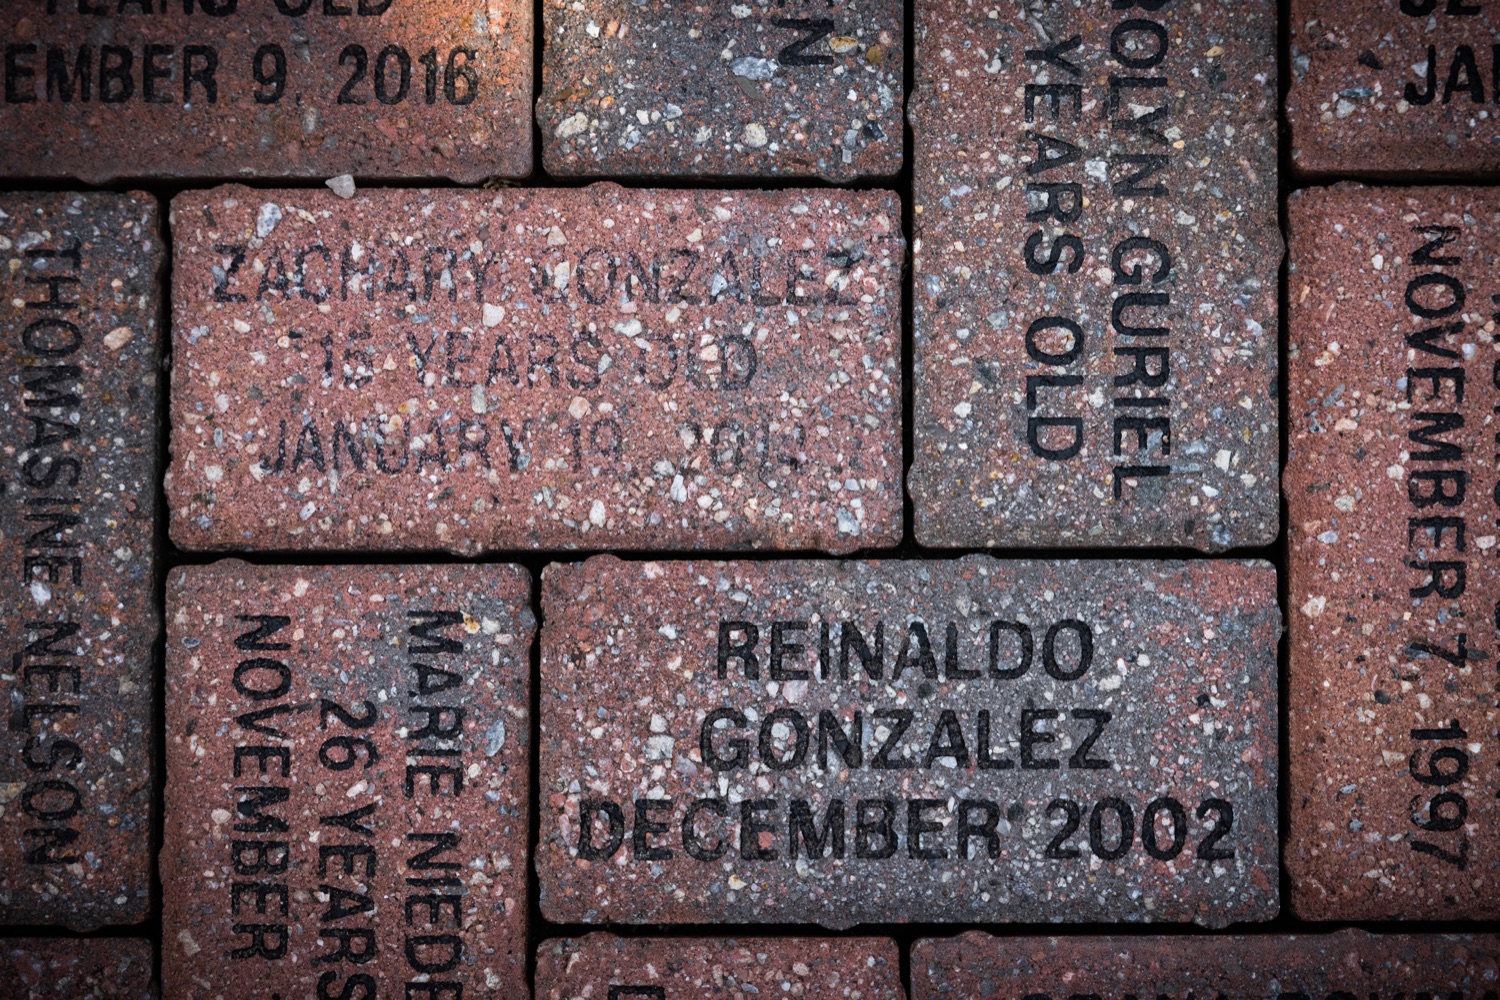 Memorial bricks in remembrance of at the DUI Victims Memorial Garden.The Pennsylvania Department of Transportation (PennDOT), the Pennsylvania State Police (PSP), and the Pennsylvania DUI Association gathered today with local police agencies and victims advocates in the DUI Victims Memorial Garden to urge motorists to celebrate responsibly ahead of the Labor Day holiday.  Harrisburg, PA  August 24, 2021<br><a href="https://filesource.amperwave.net/commonwealthofpa/photo/18979_pdot_laborDay_dz_004.jpg" target="_blank">⇣ Download Photo</a>